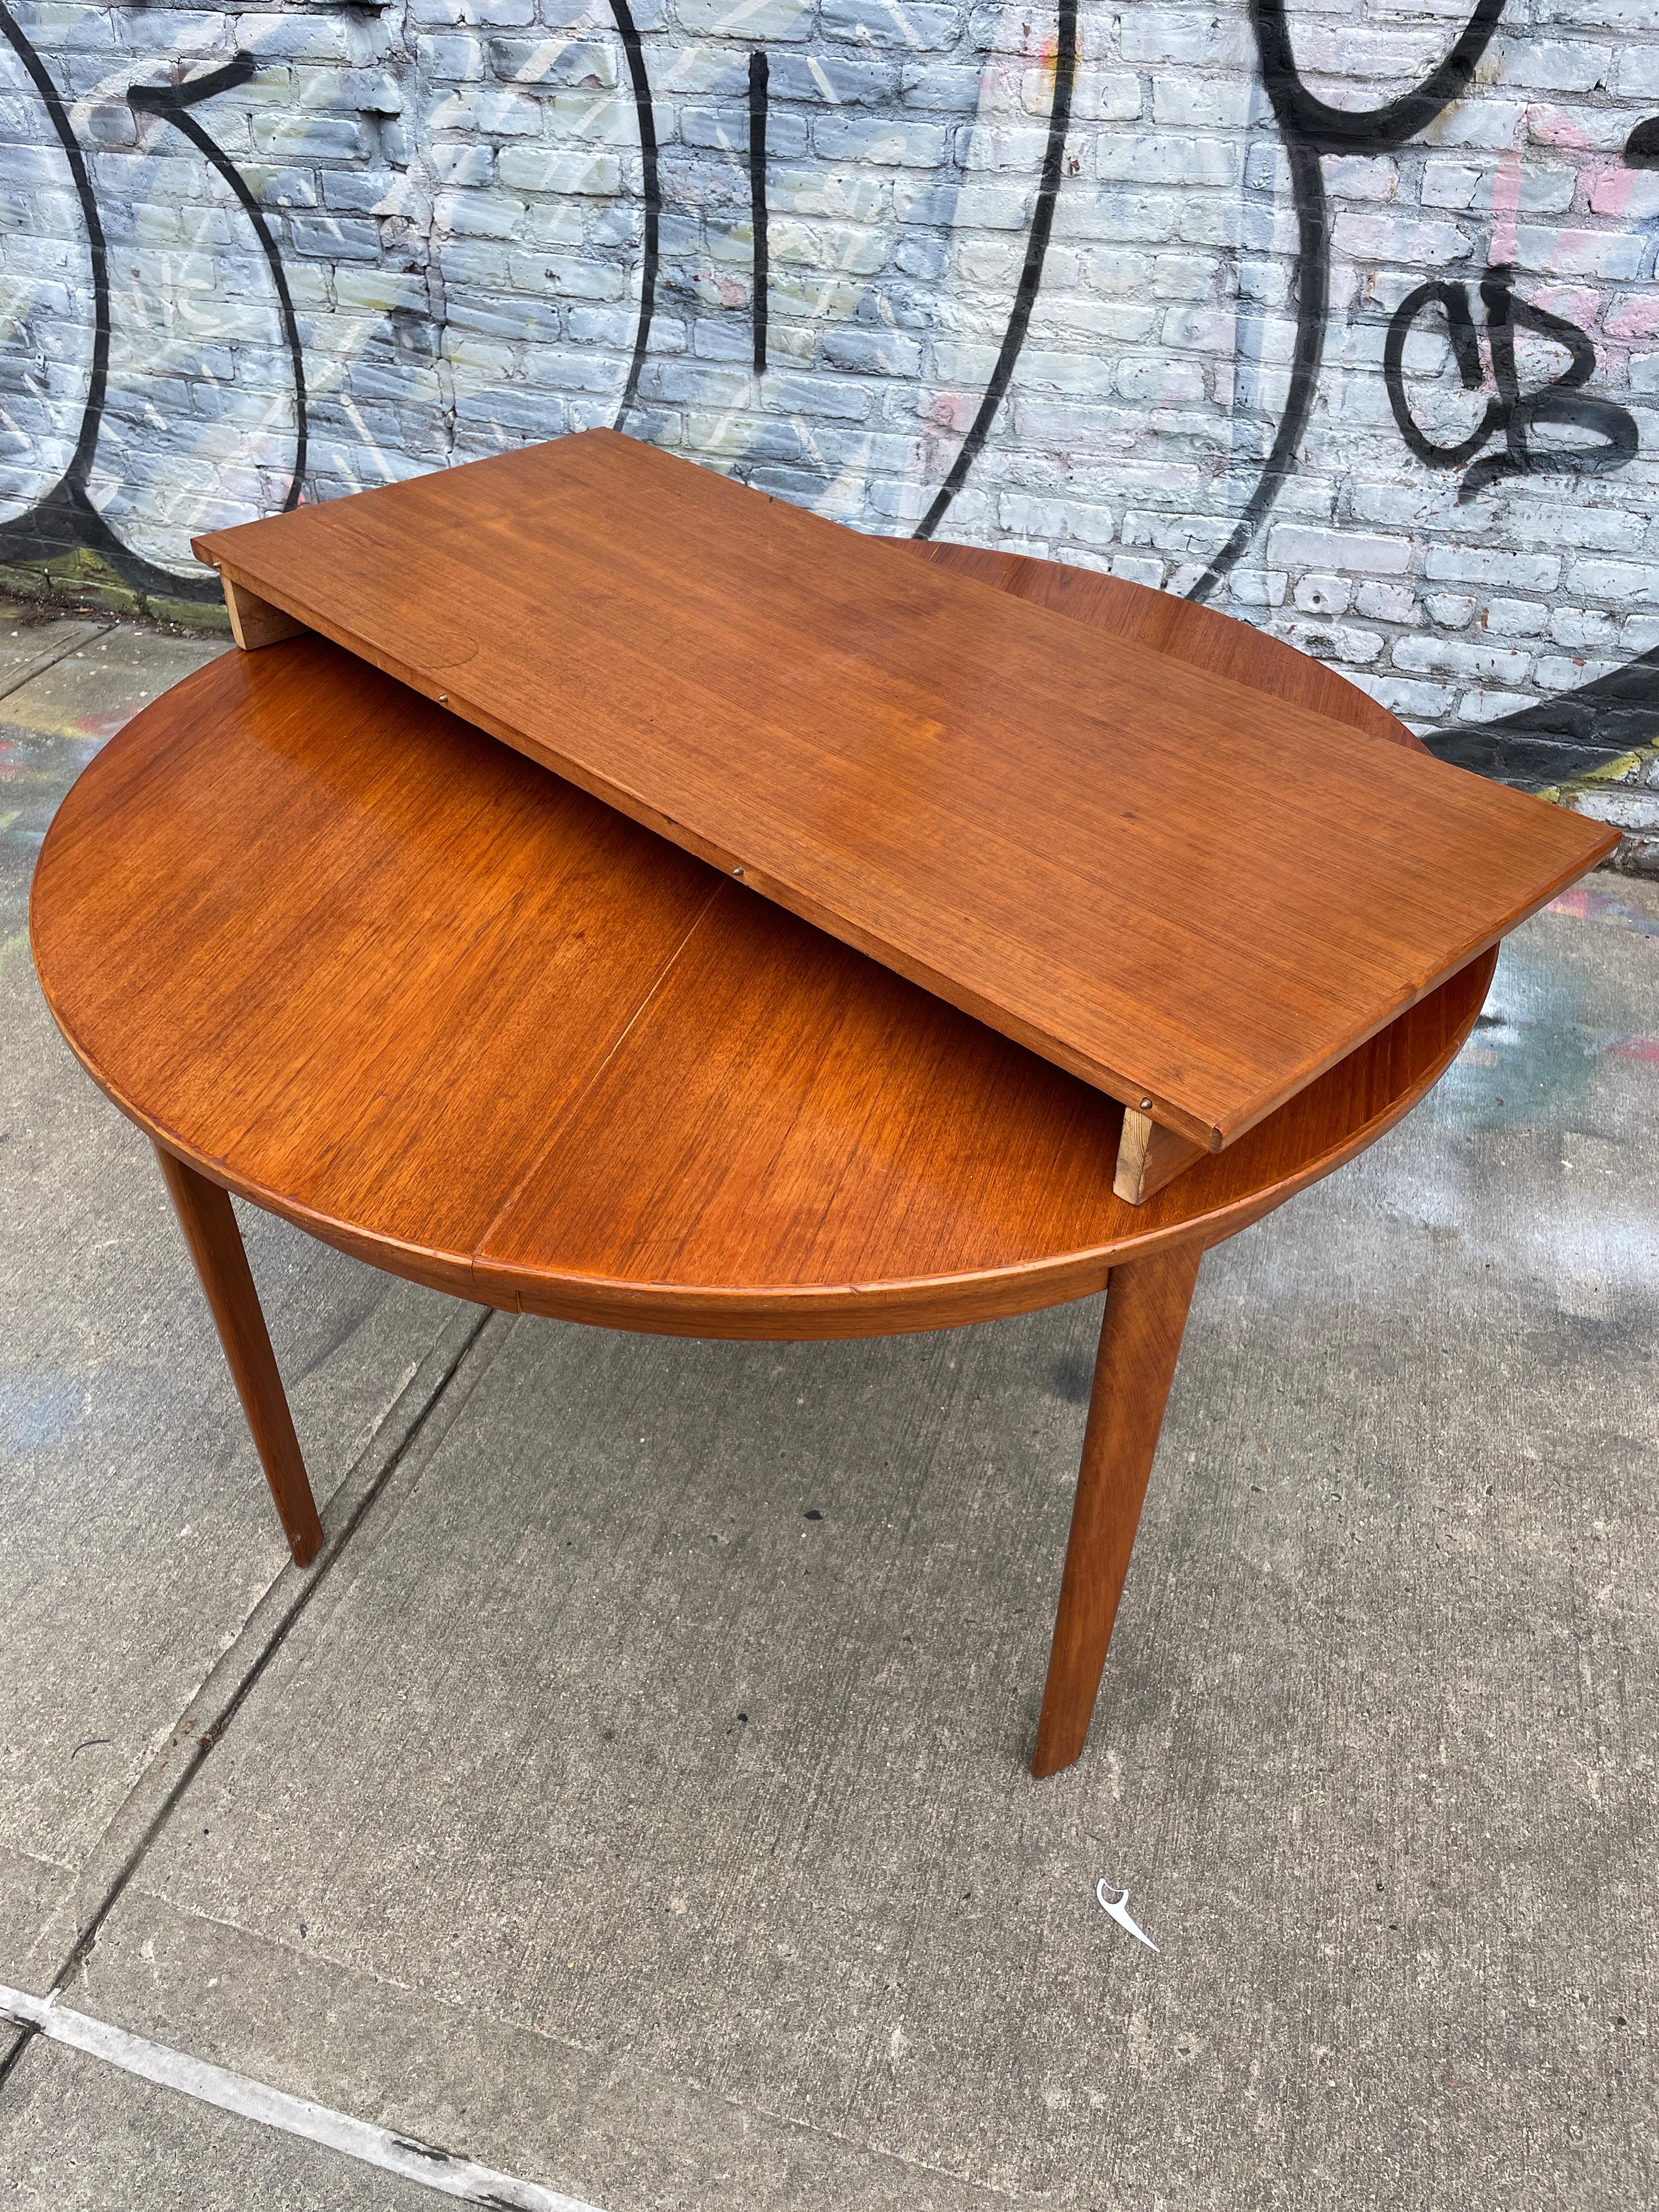 Midcentury teak round Danish Modern extension dining table with (3) leaves. This table has Solid teak legs that unscrew with bolts. This table is in good vintage condition shows signs of use, (1) leaf with matches the table 100% and has an apron.